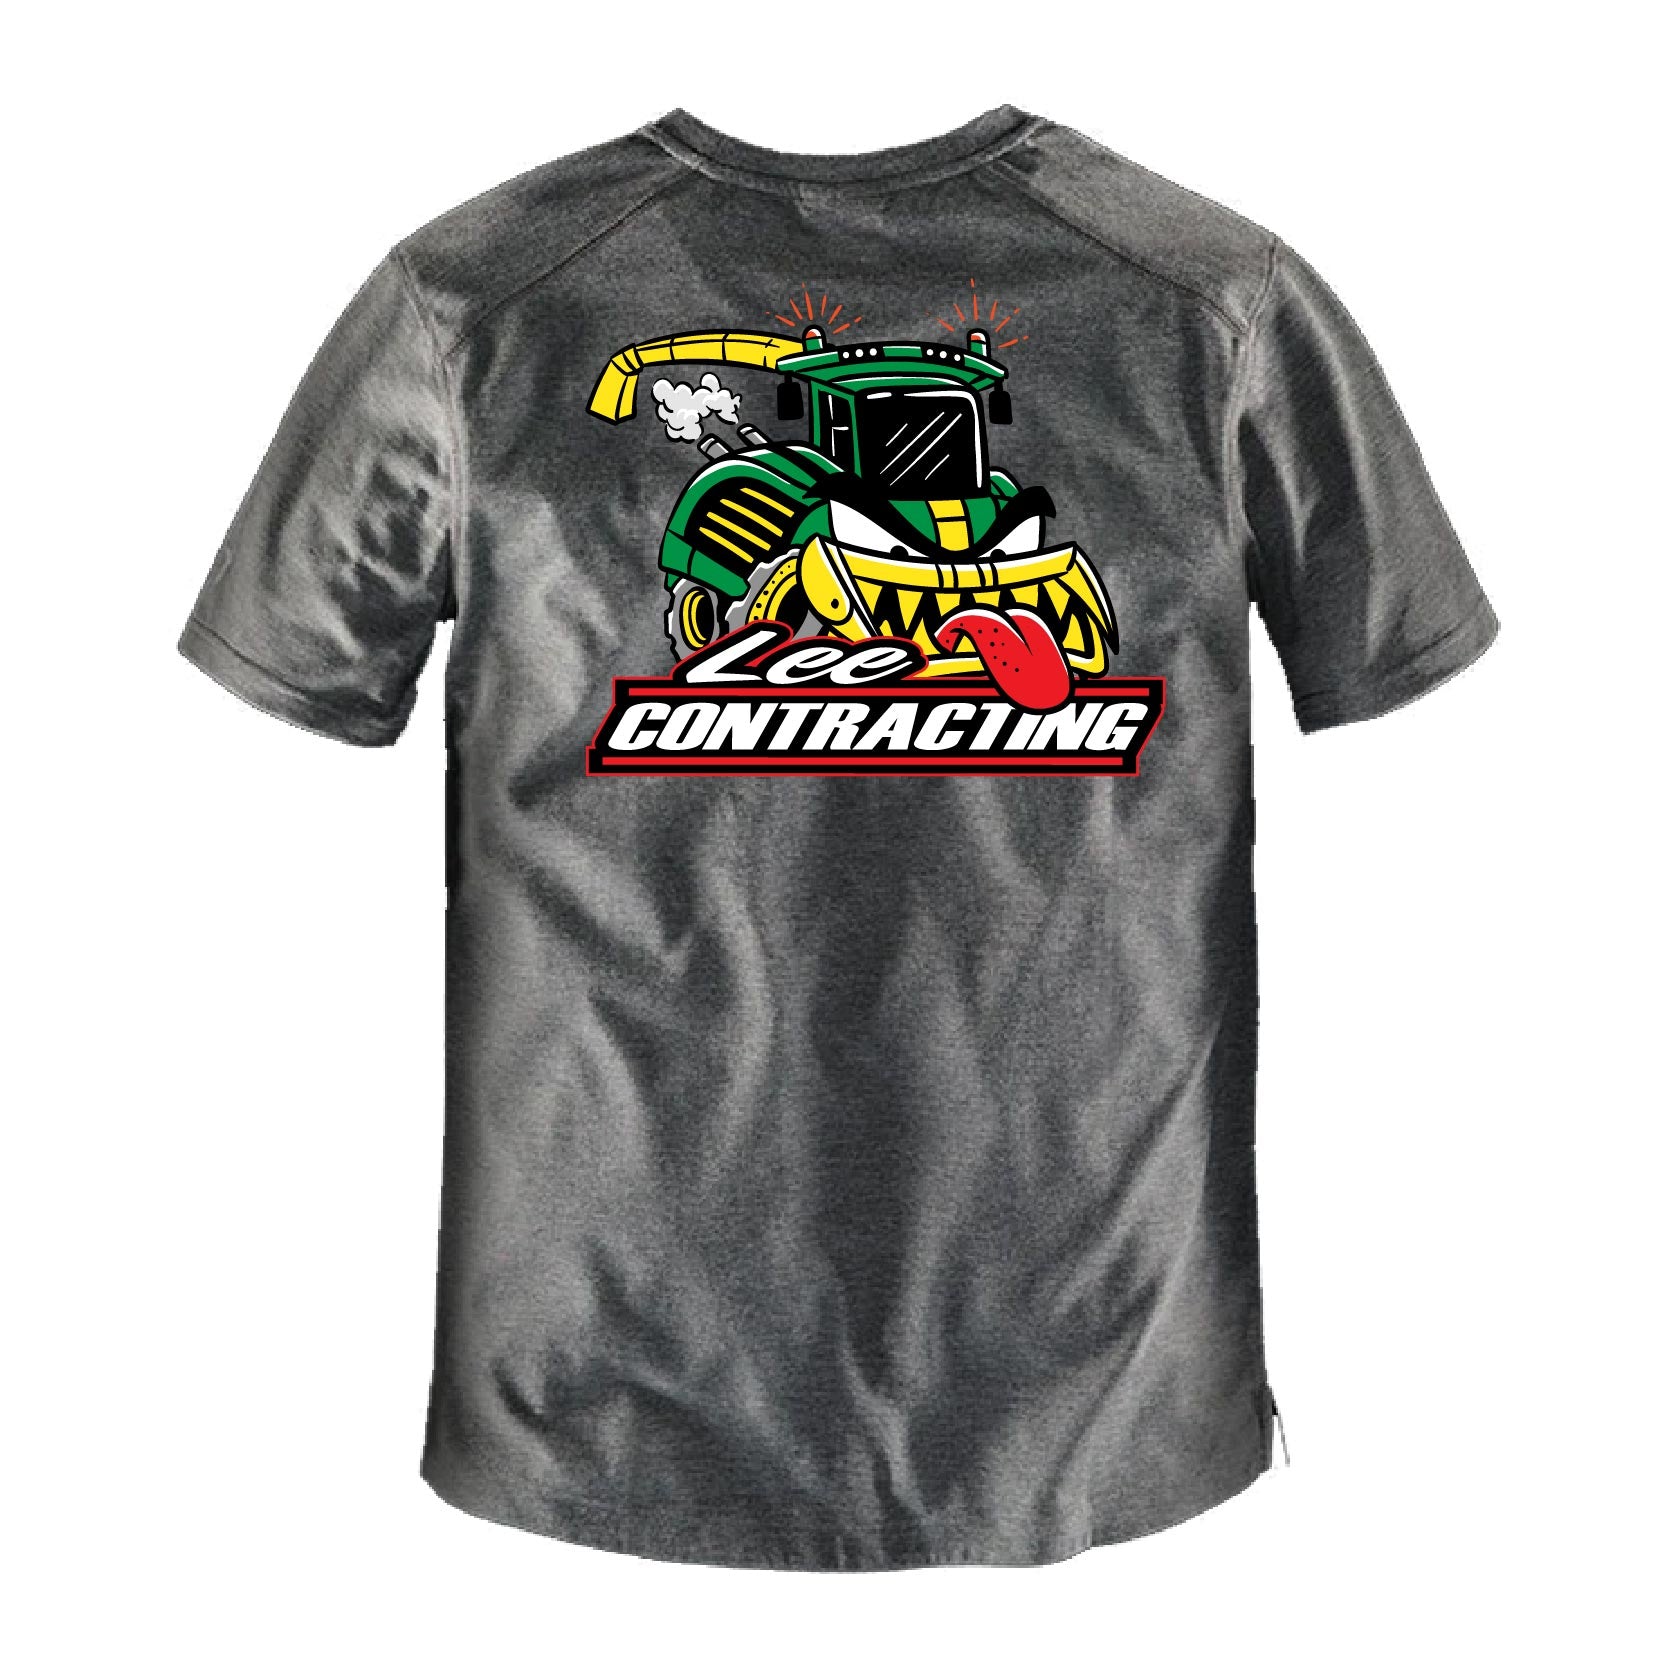 Lee Contracting T-Shirt